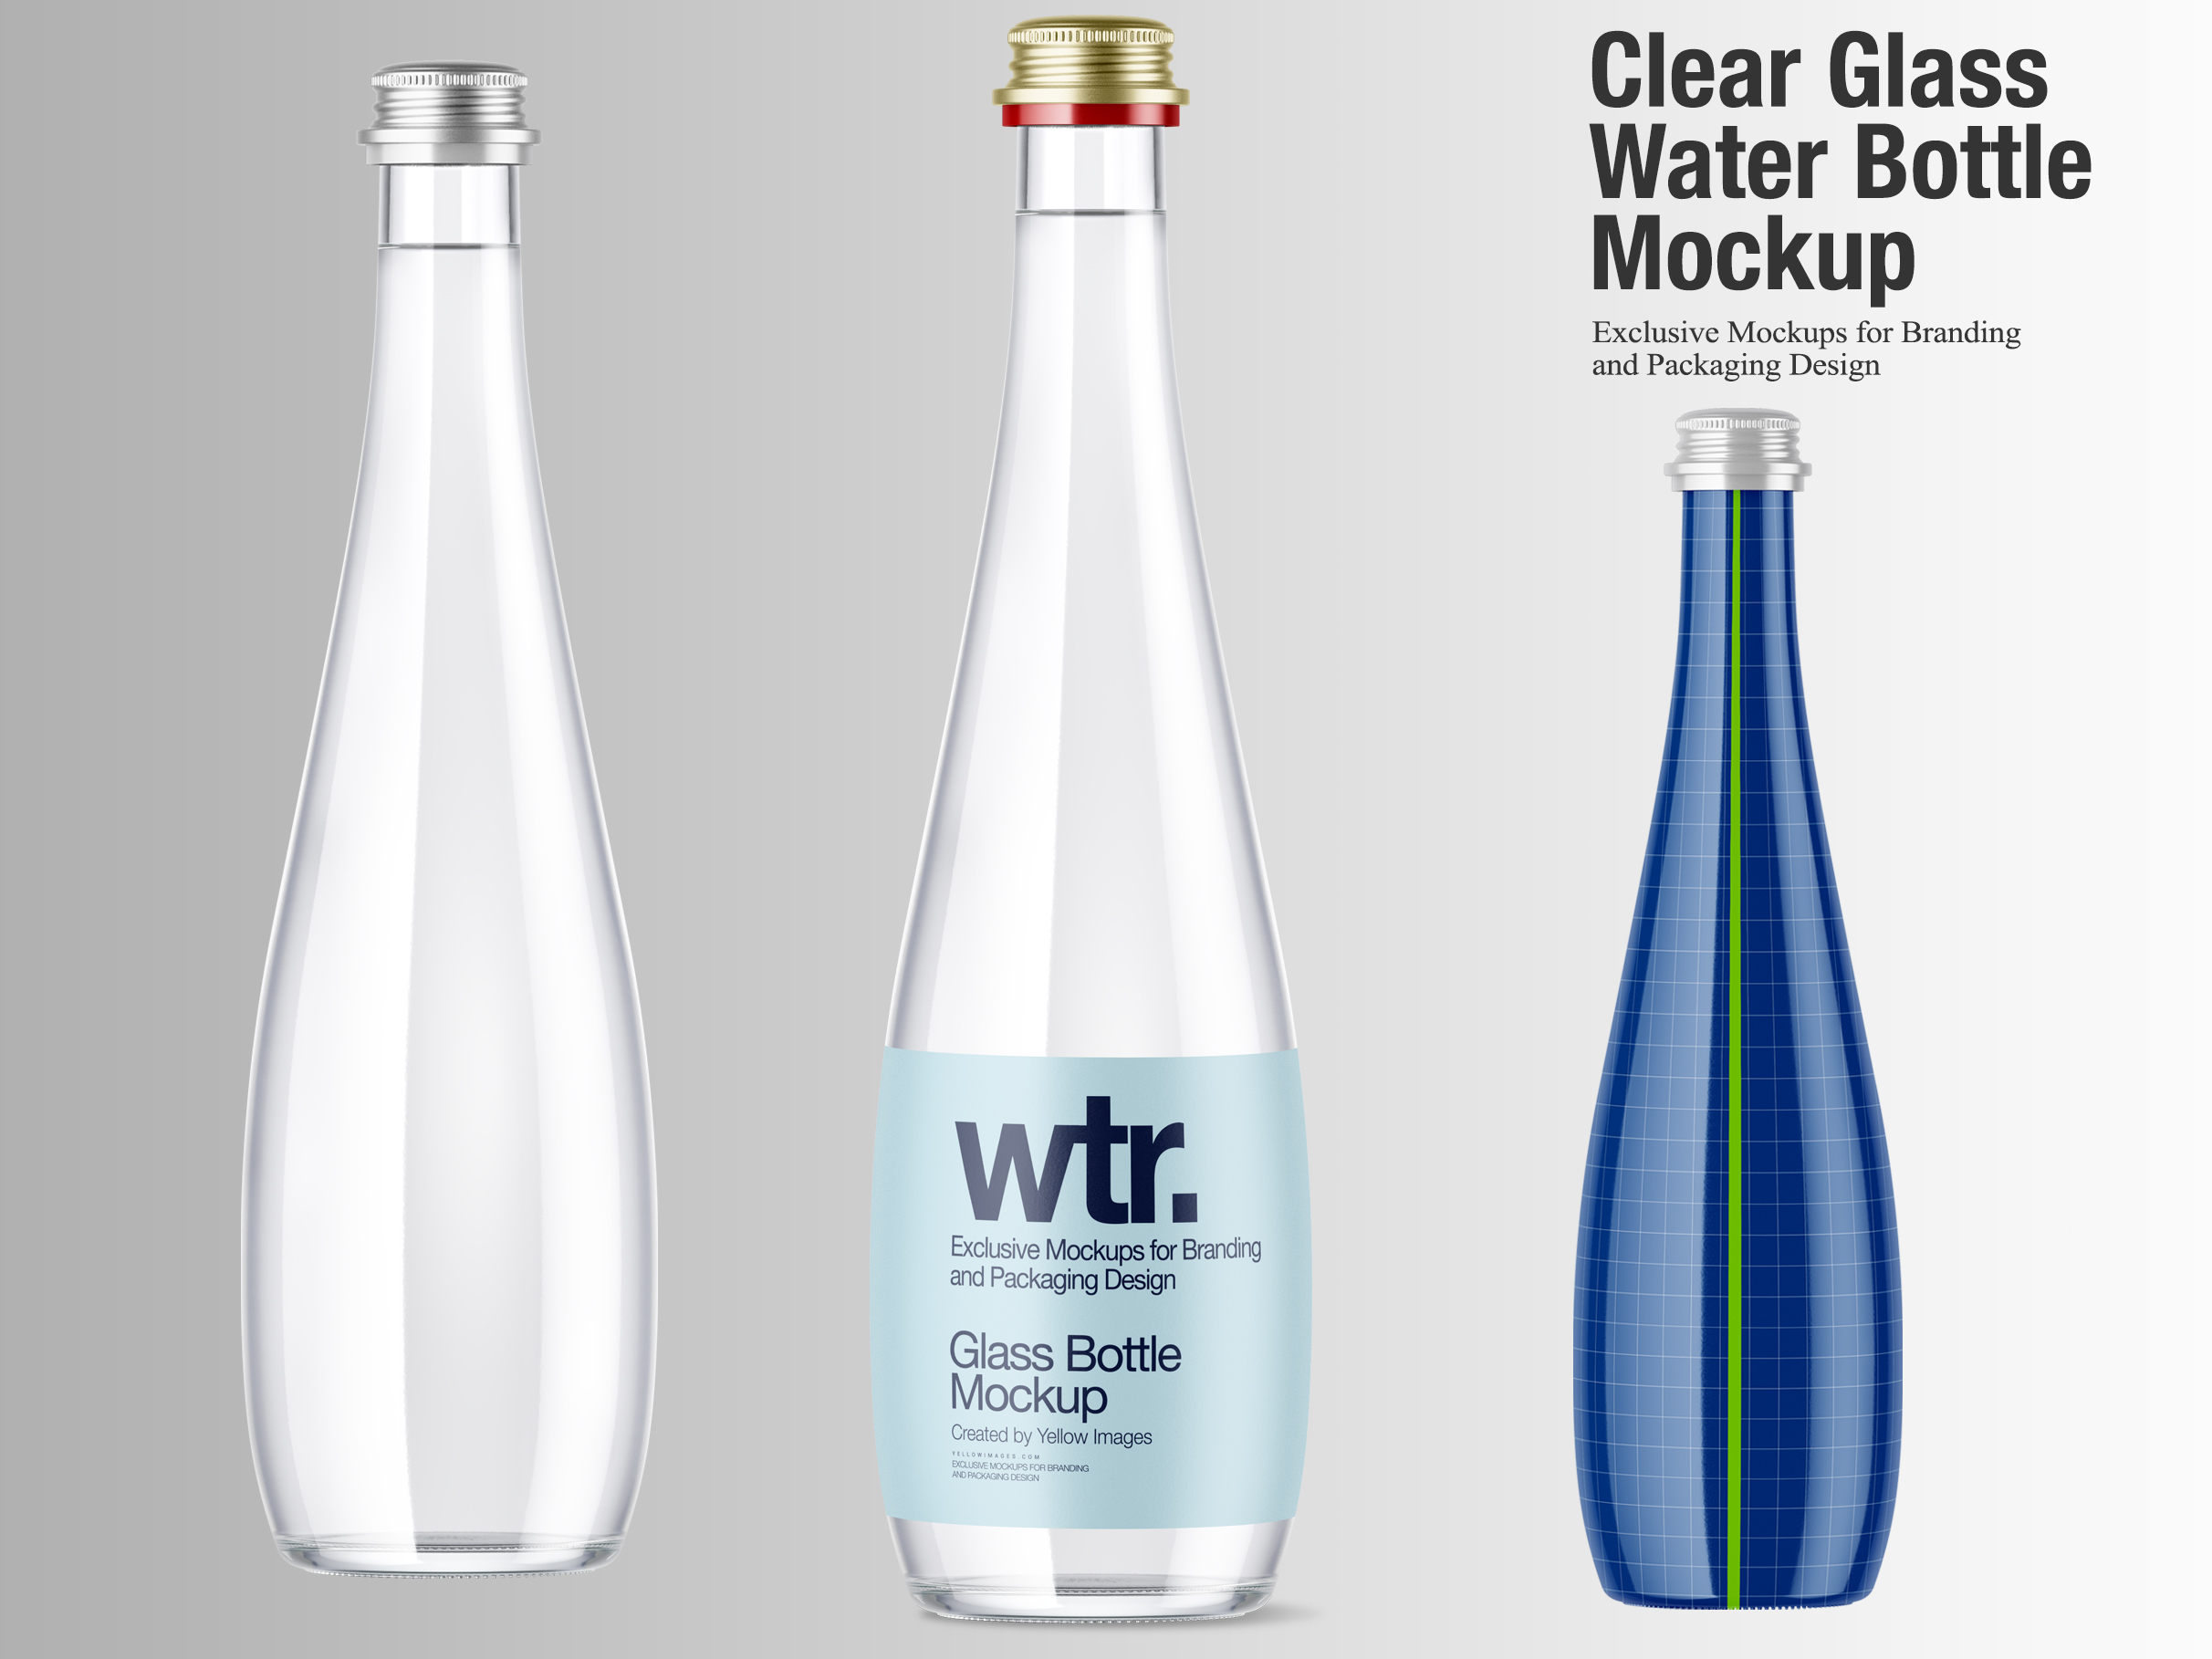 Clear Glass Bottle Mockup Free Download Free And Premium Psd Mockup Templates And Design Assets